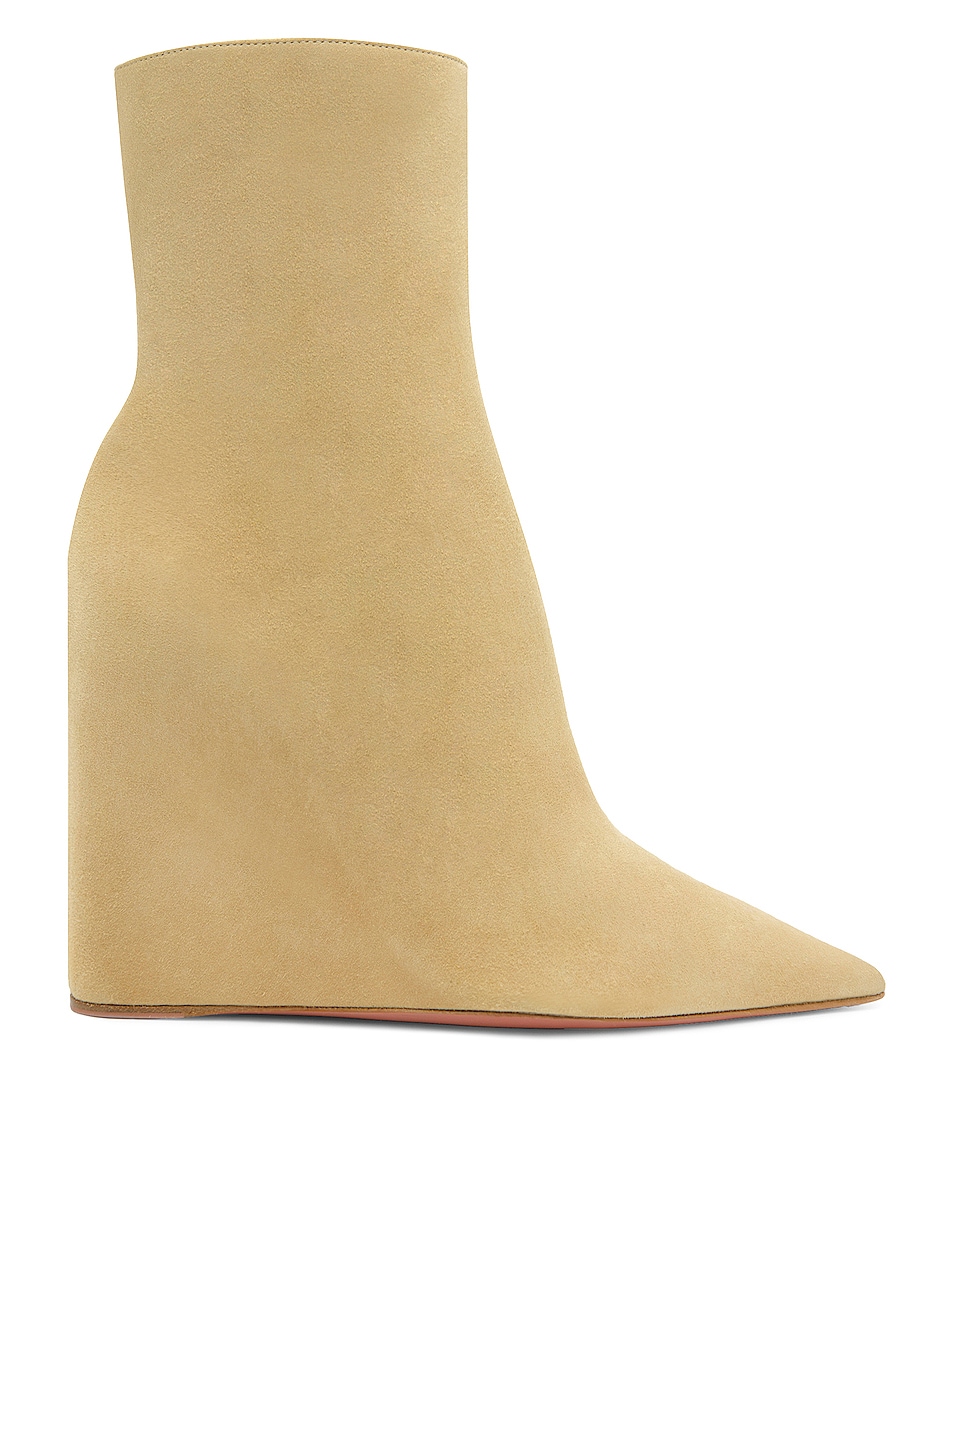 Image 1 of AMINA MUADDI Pernille Suede Wedge Bootie in Buttercup